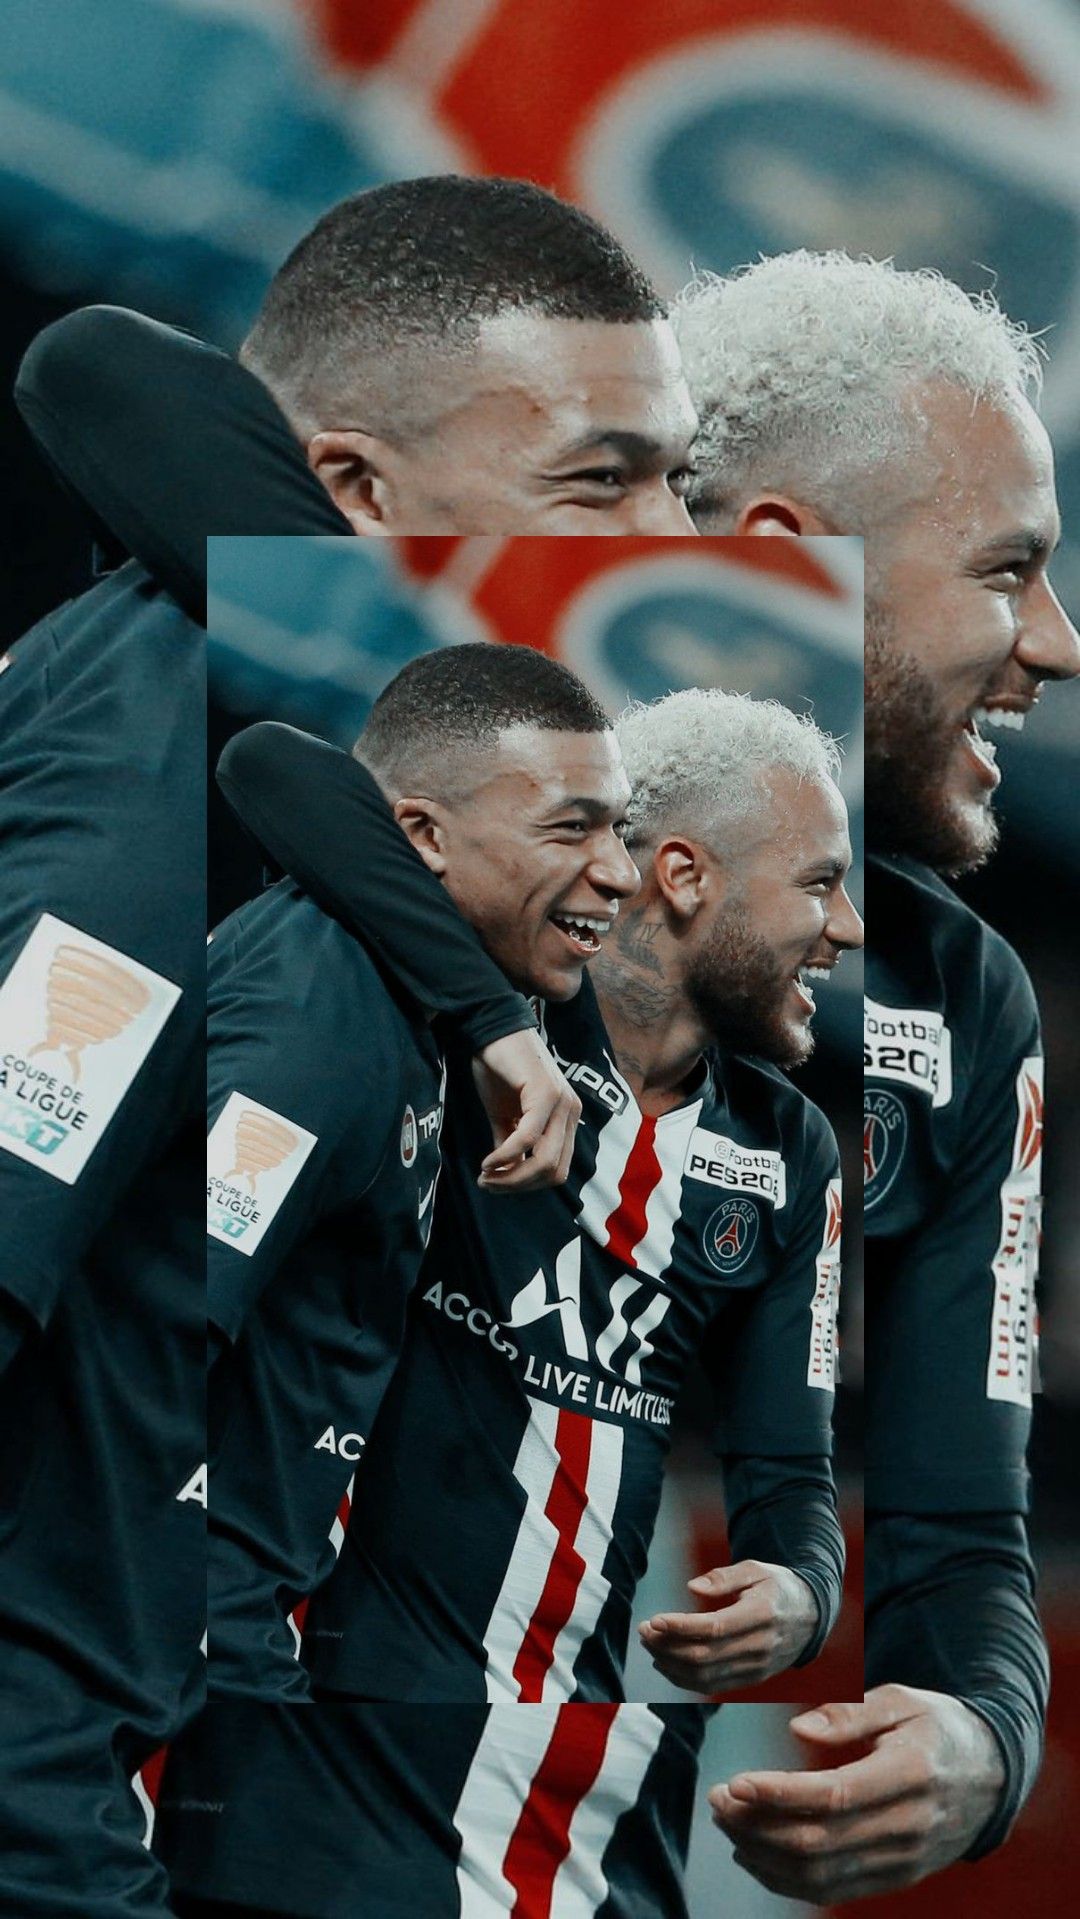 Neymar And Mbappe Wallpapers